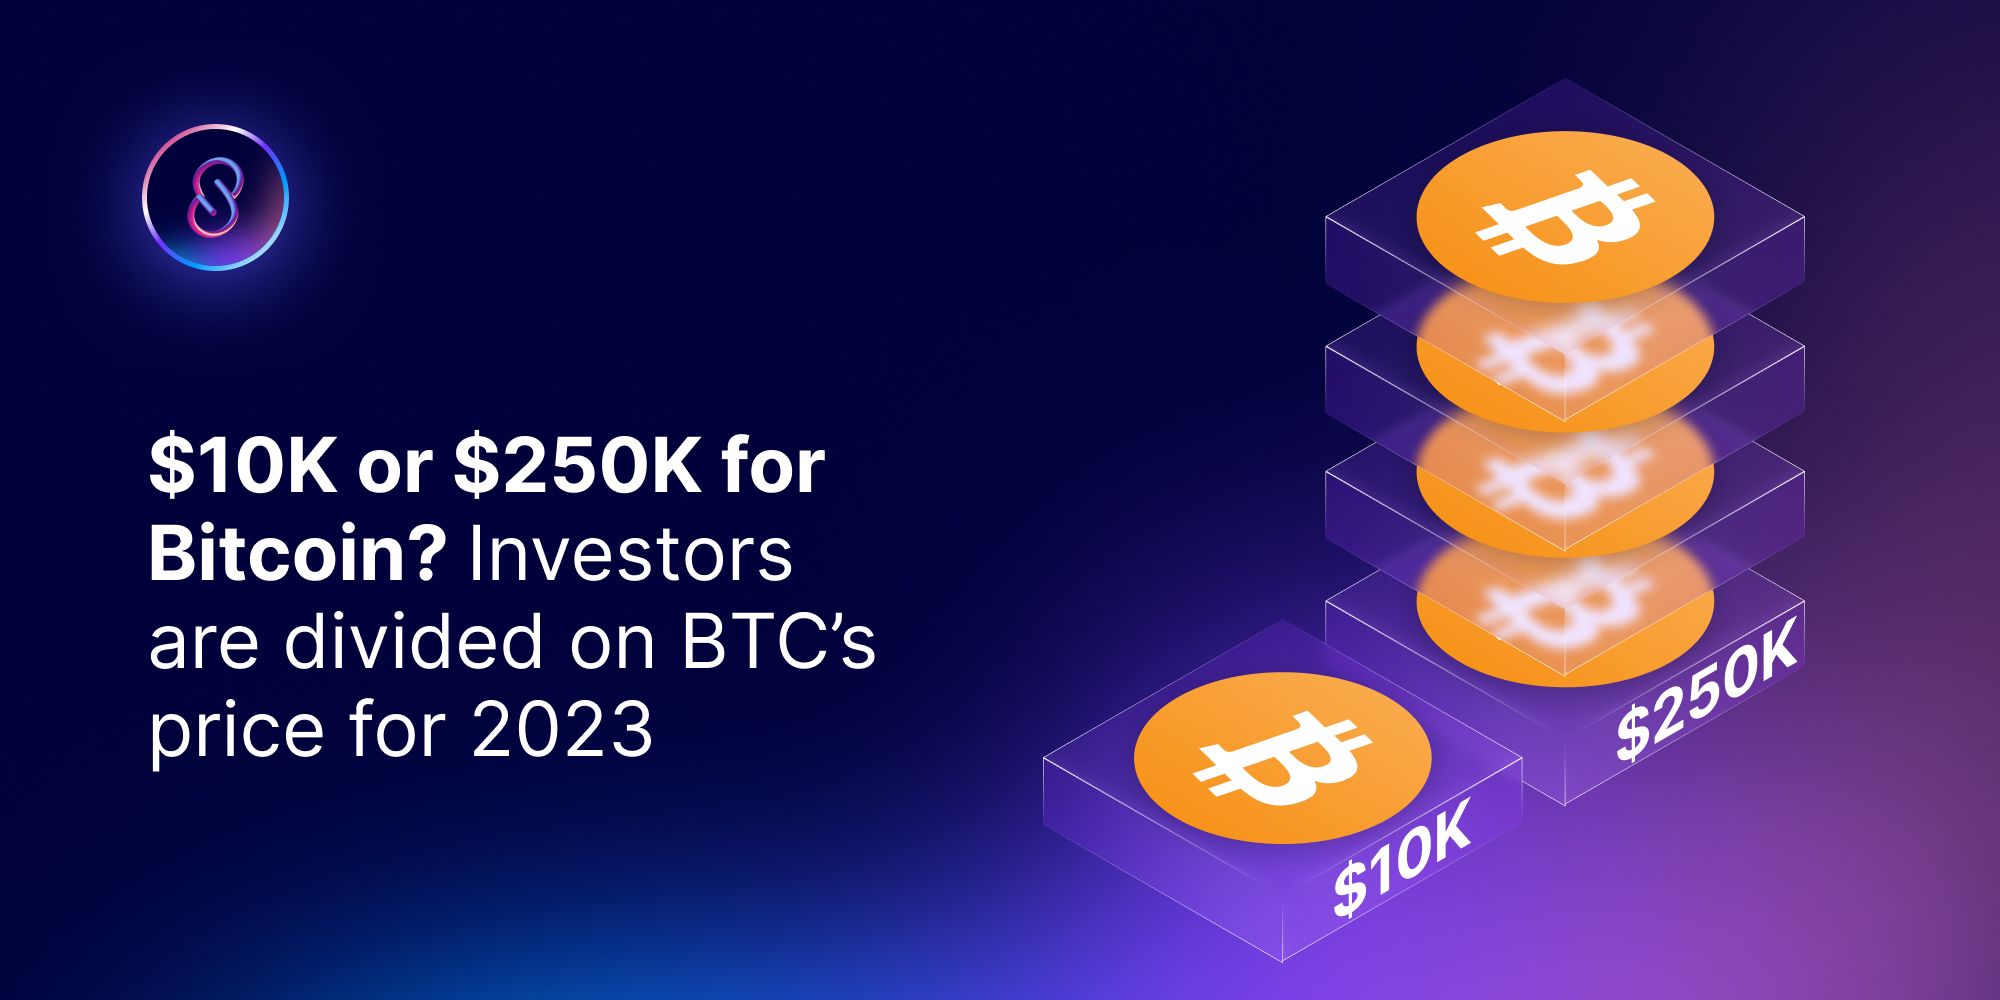 $10K or $250K for Bitcoin? Investors are divided on BTC’s price for 2023